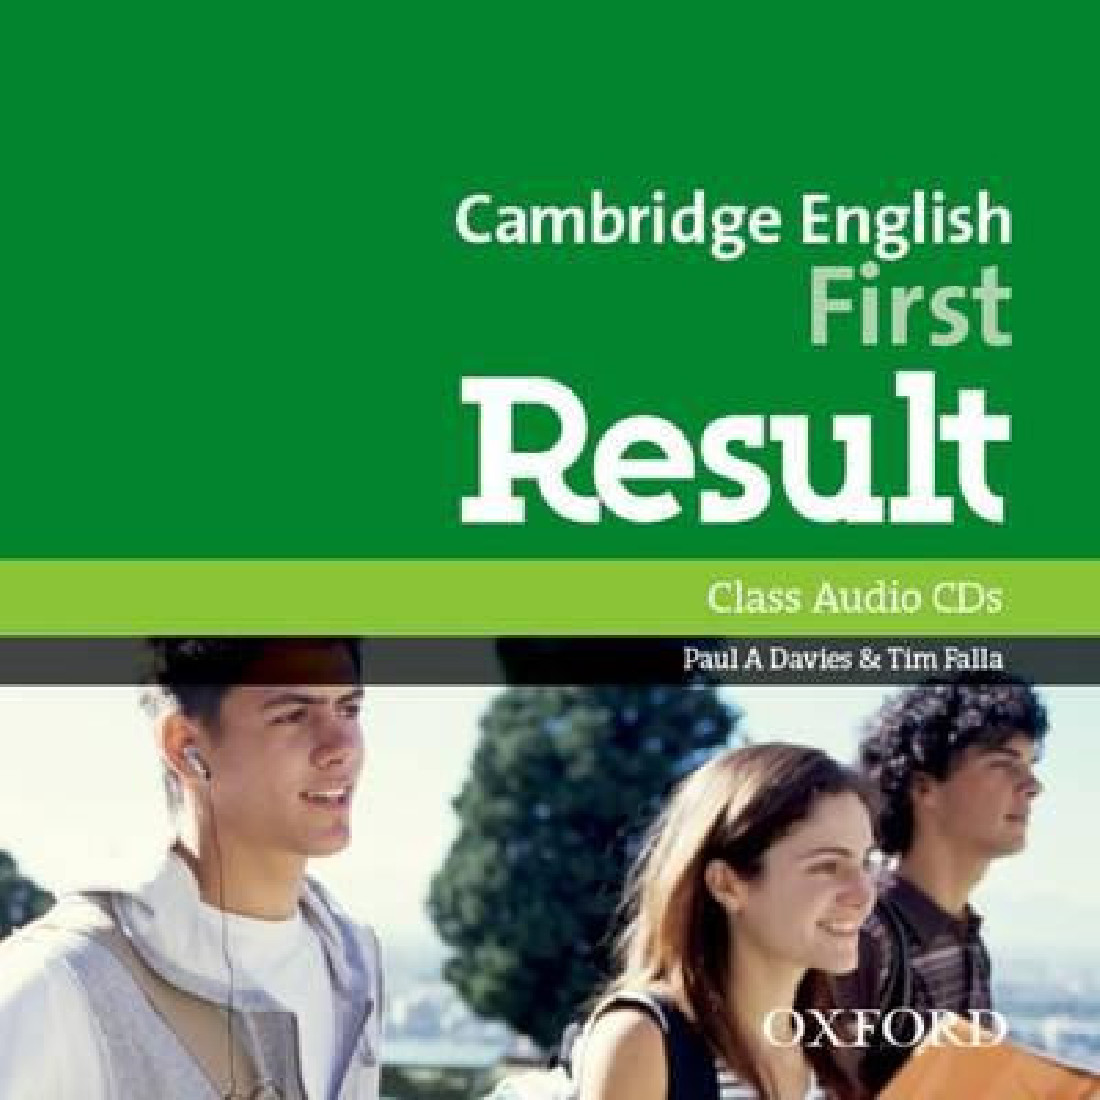 CAMBRIDGE ENGLISH FIRST RESULT CD CLASS (2) N/E